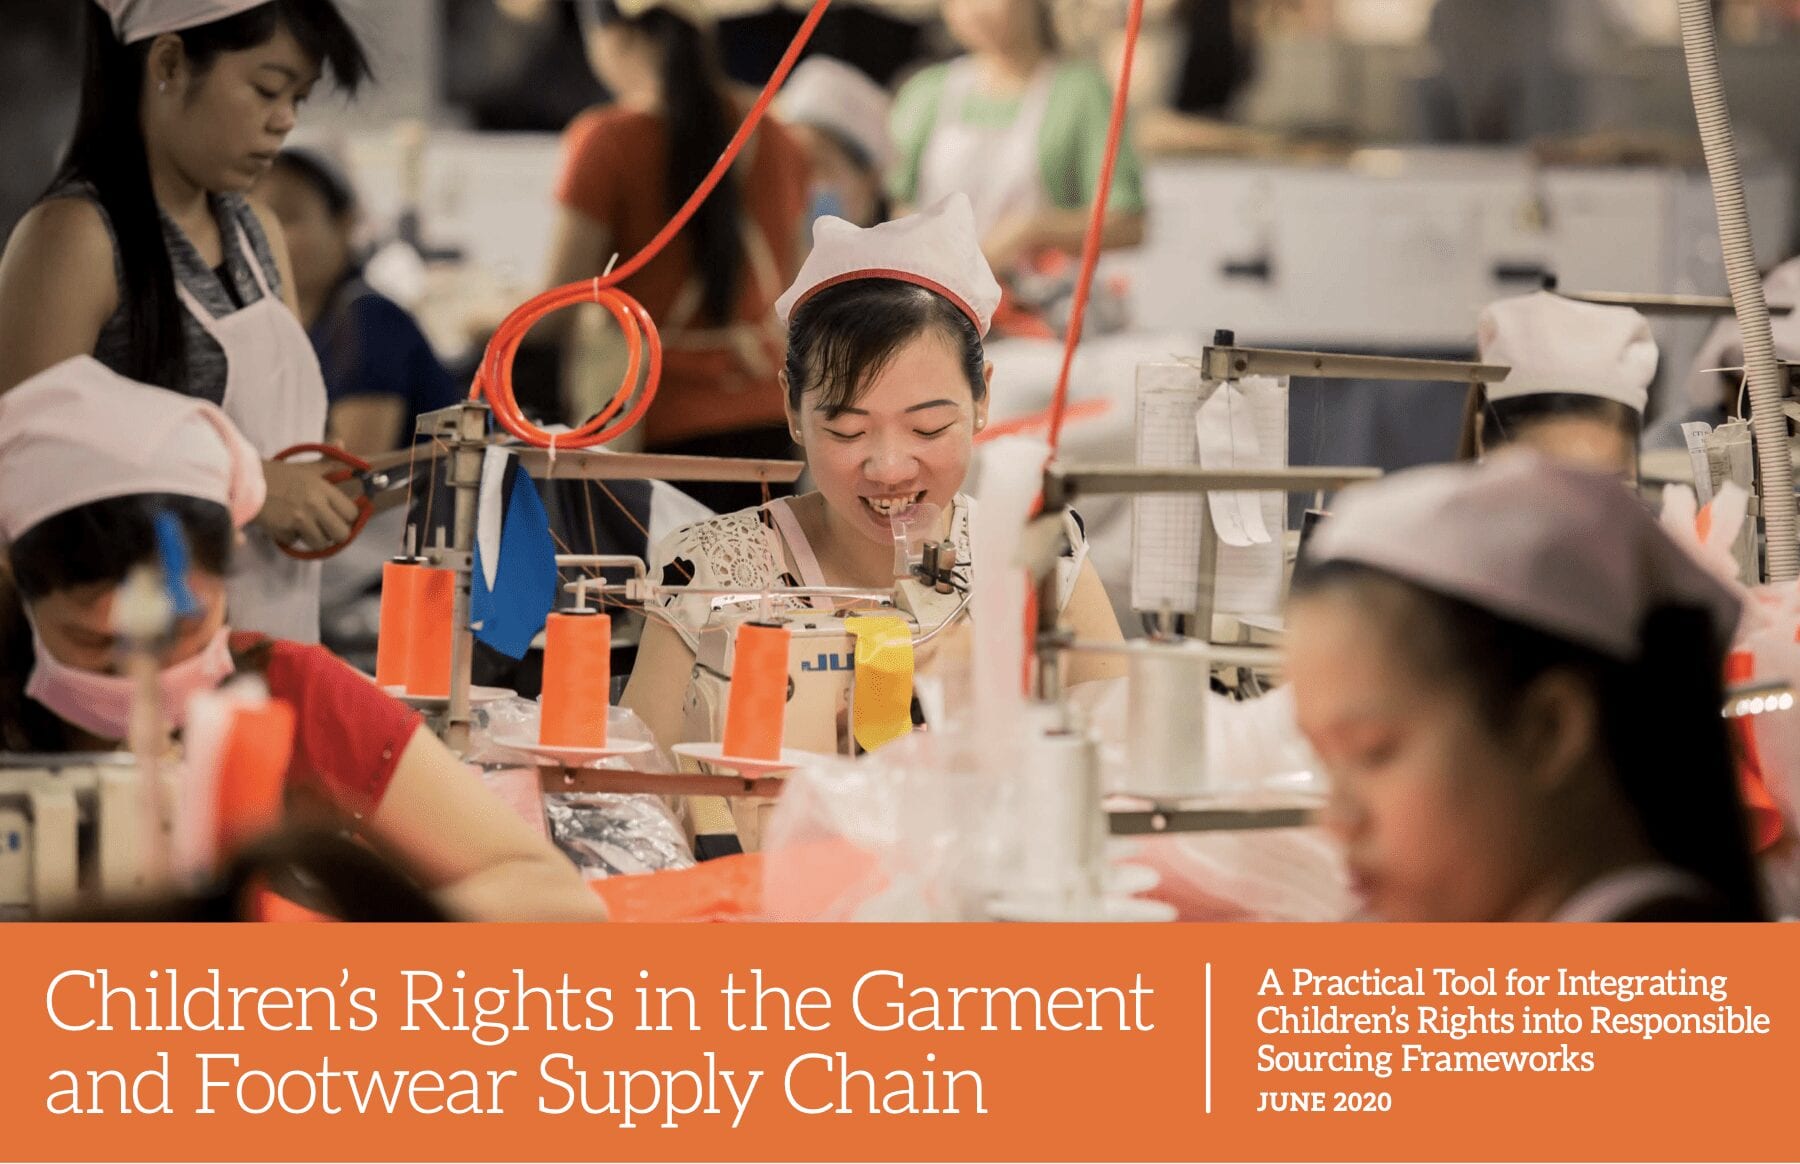 Children’s Rights in the Garment and Footwear Supply Chain: A Practical Tool for Integrating Children’s Rights into Responsible Sourcing Frameworks